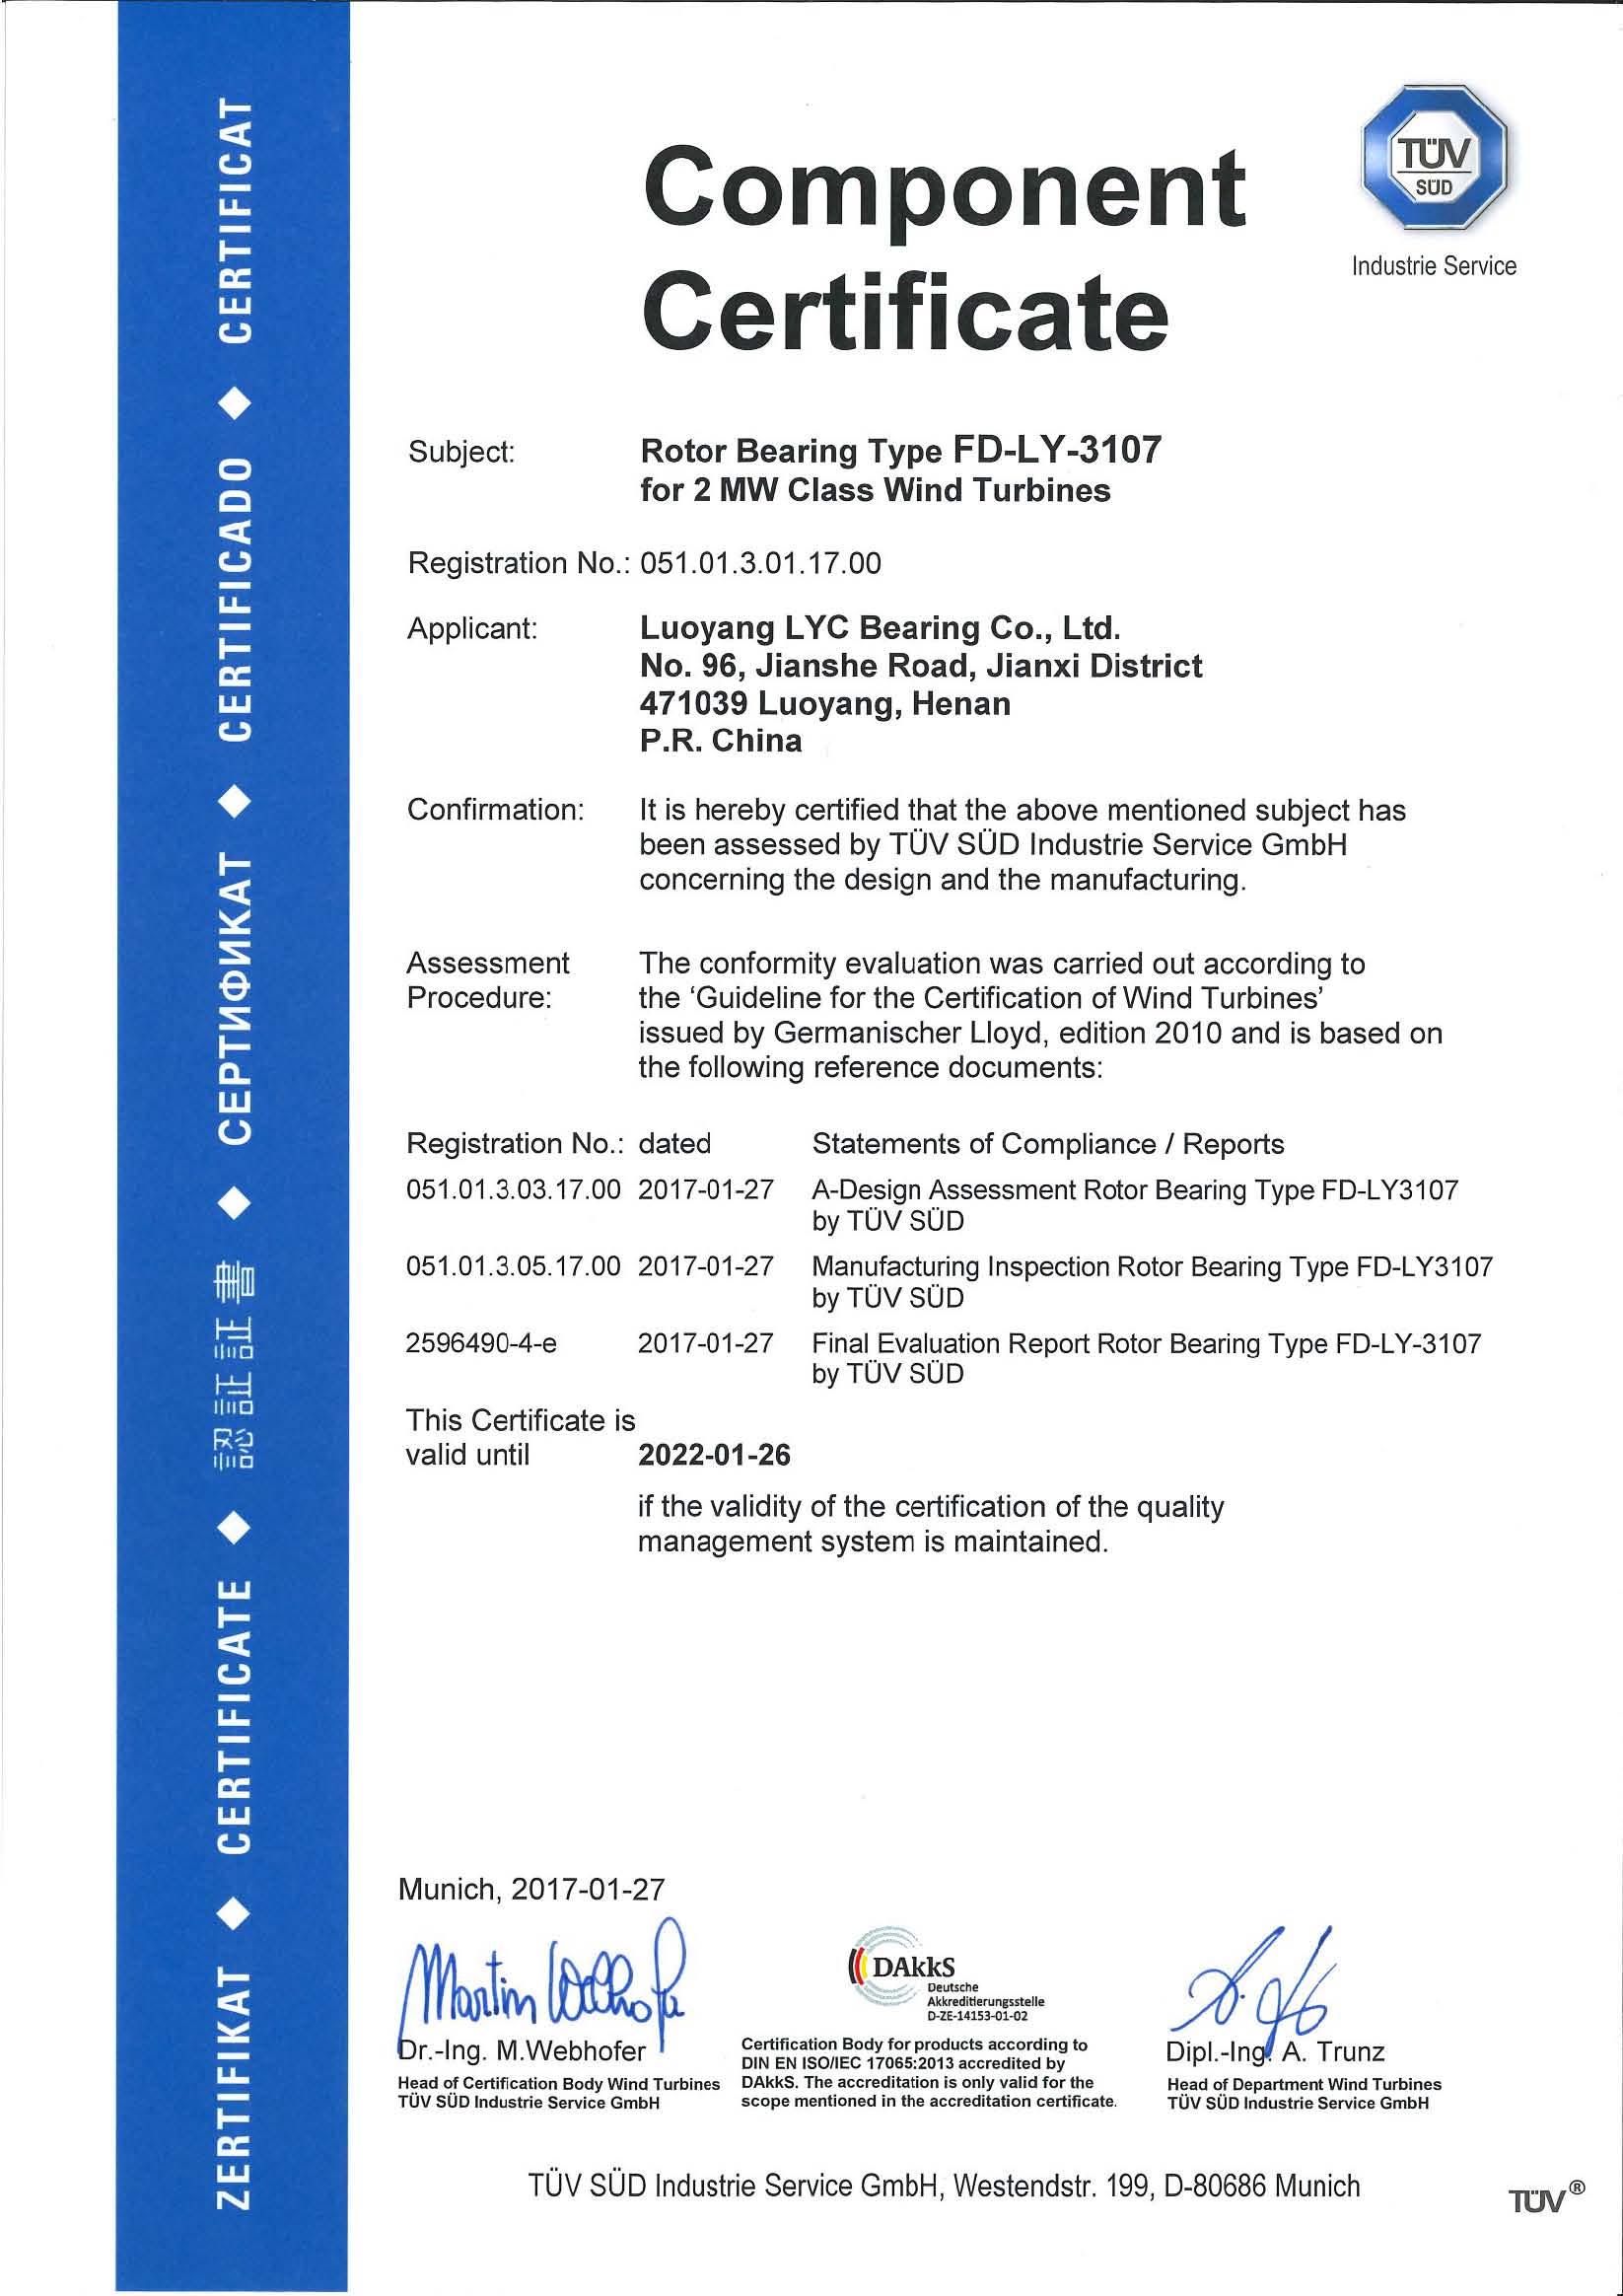 Luoyang LYC Bearing Corp. passed GL Wind power product certification